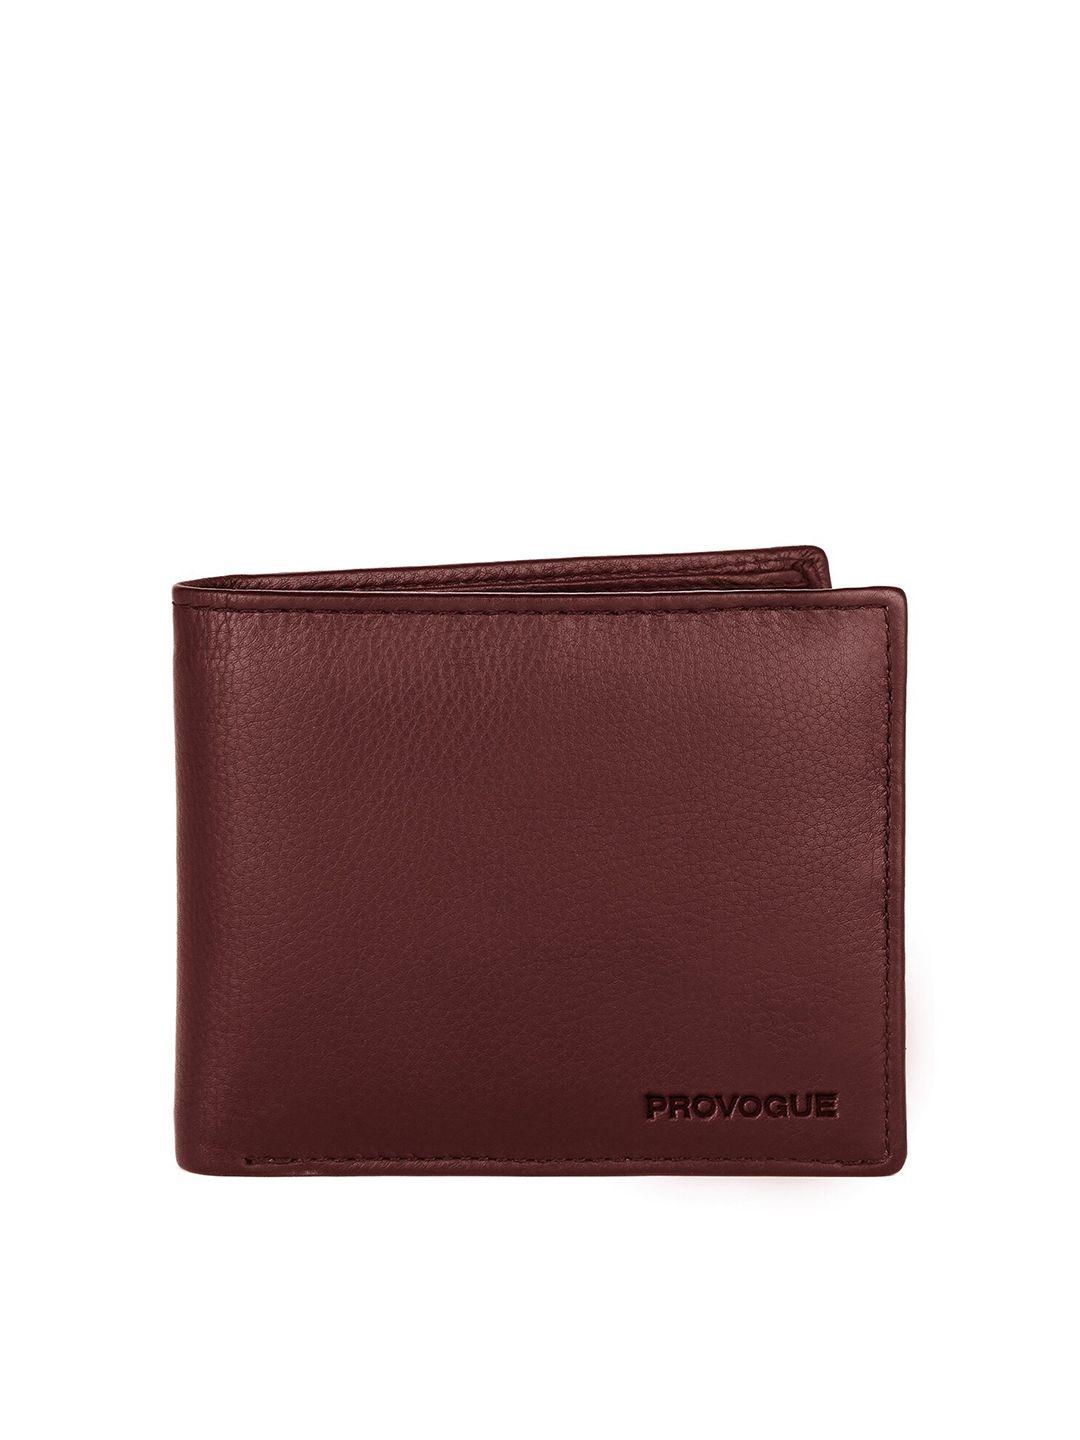 provogue men maroon leather two fold wallet